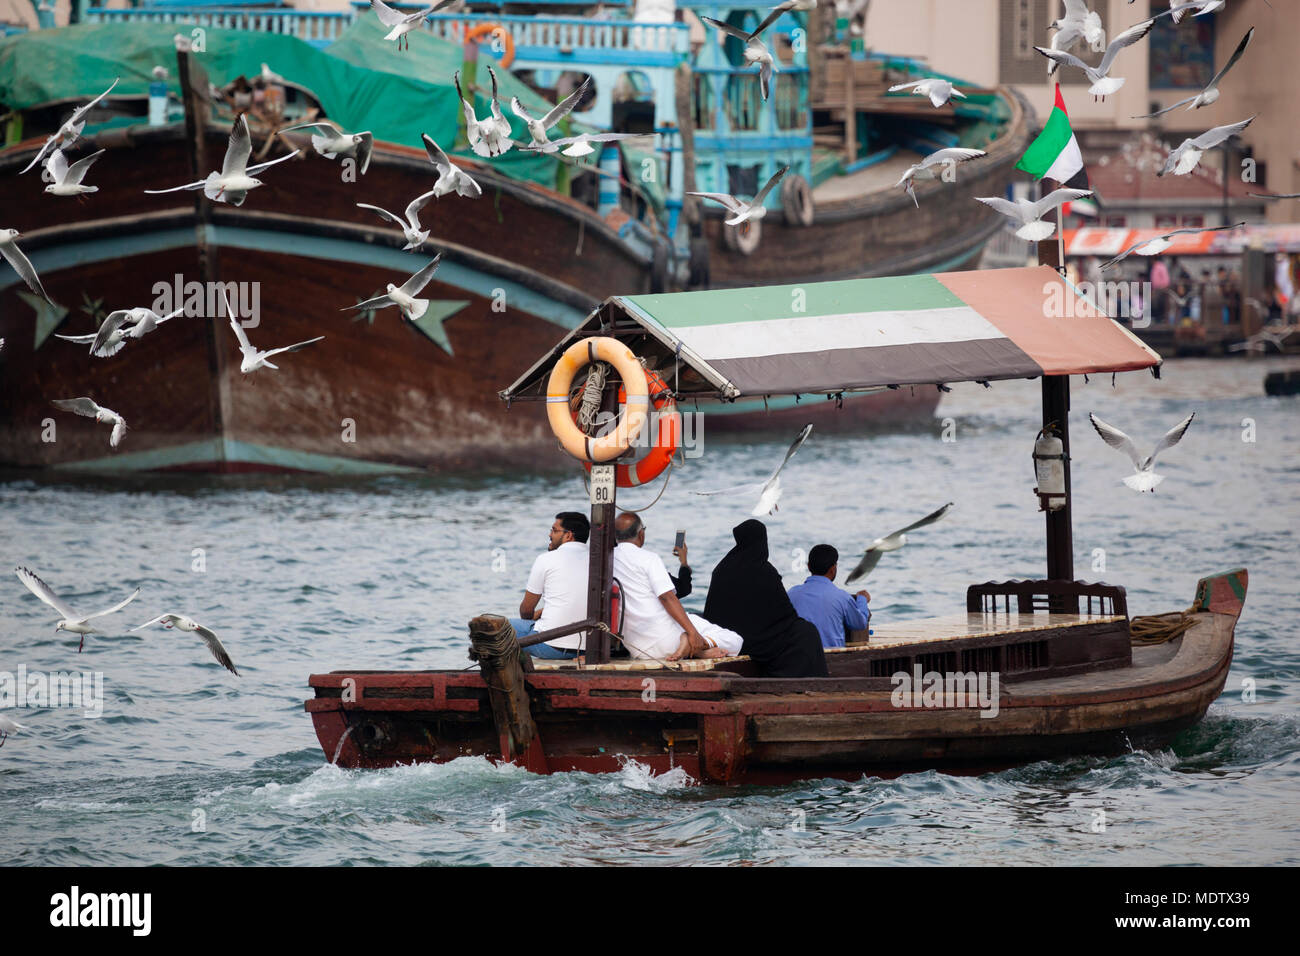 Local people crossing the Dubai Creek on an abra with dhows in the background and seagulls flying behind, Dubai, United Arab Emirates, Middle East Stock Photo